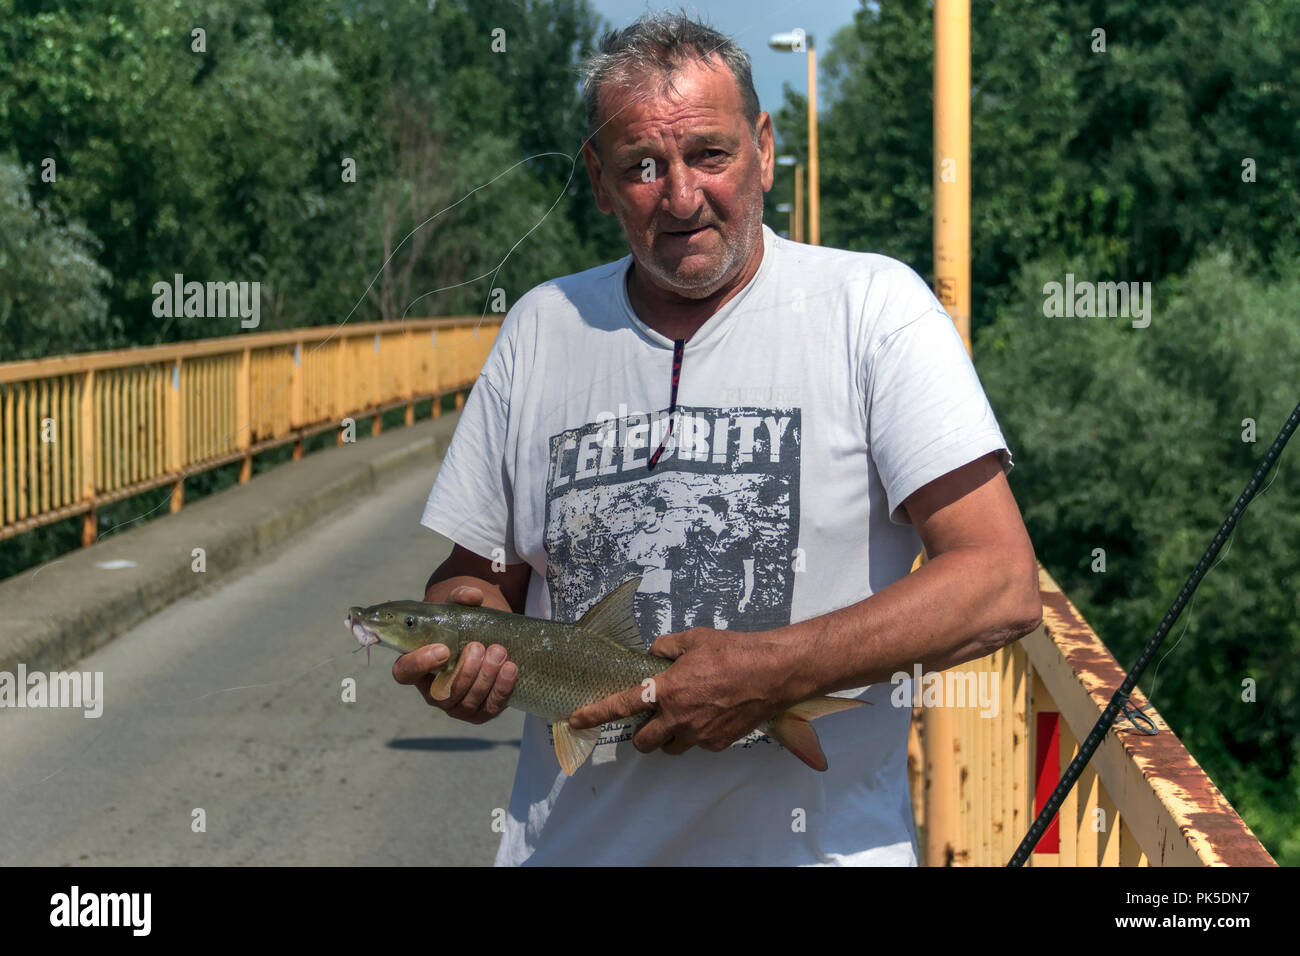 Samac, Bosnia and Herzegovina, August 2018 - Angler on a bridge holding a Barbel (Barbus barbus) that has just been caught from the River Bosna Stock Photo